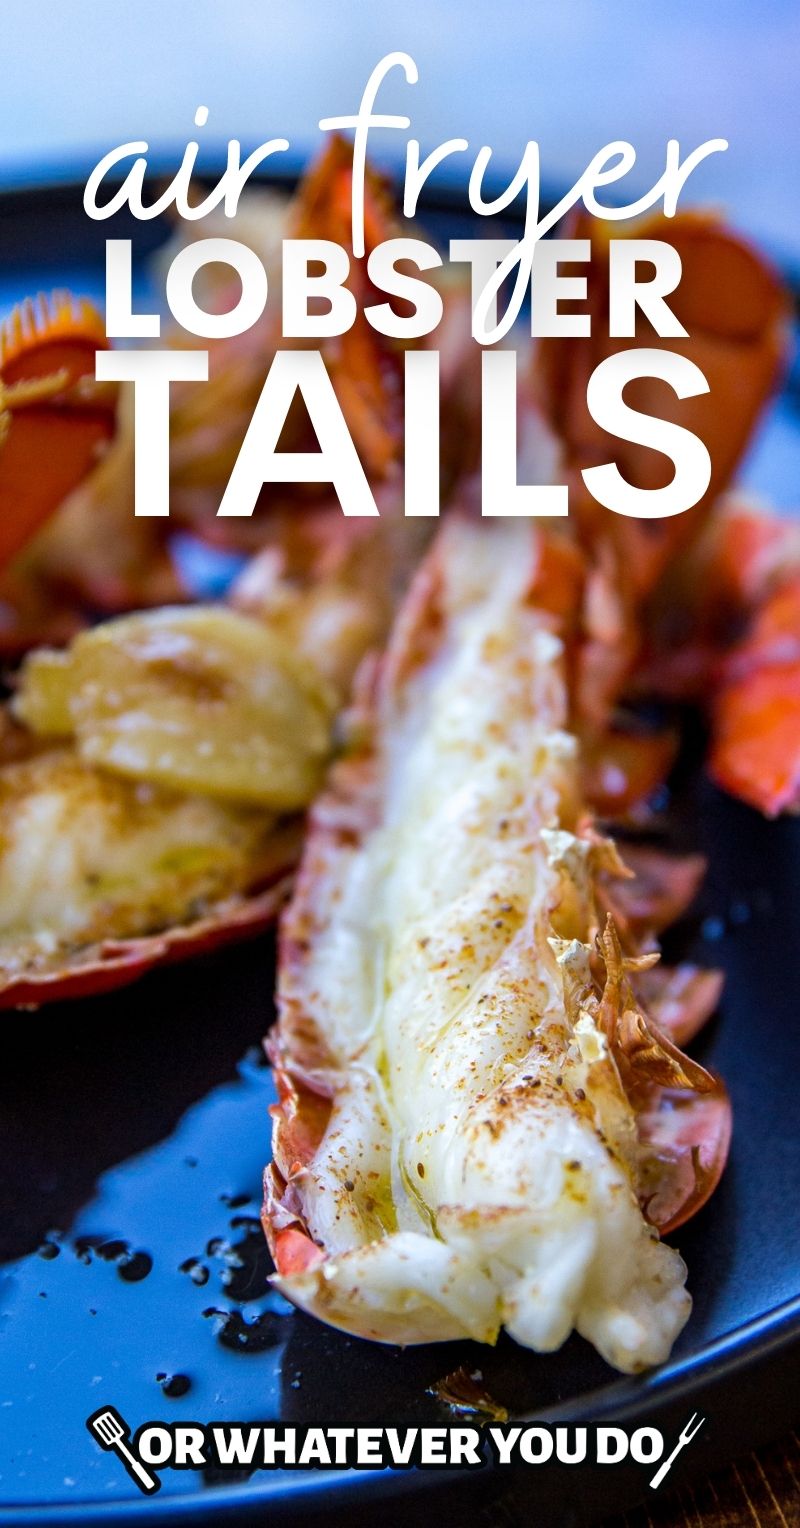 Blackstone Grilled Lobster Tails